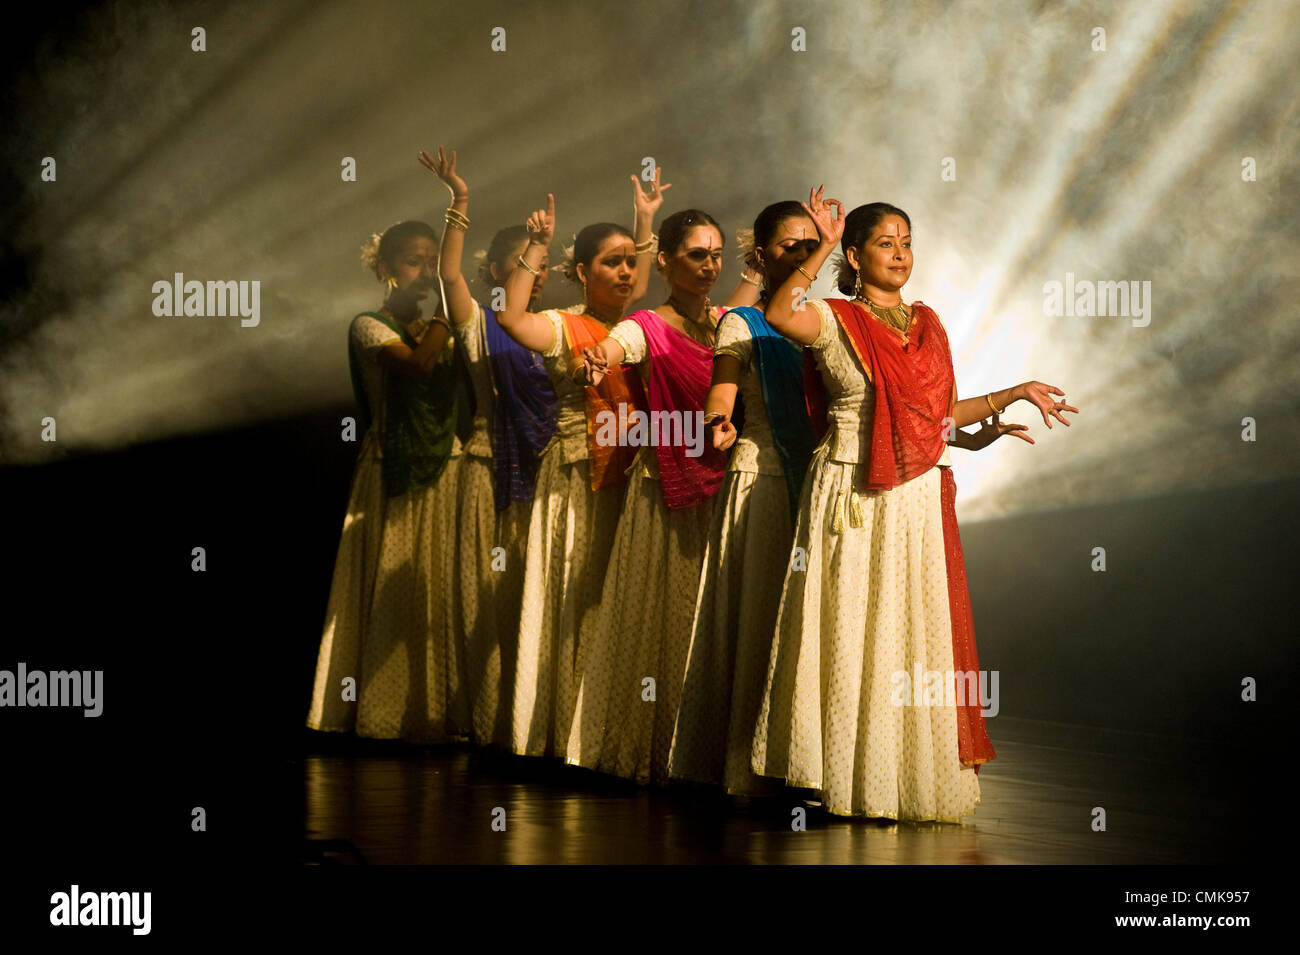 21st Aug 2012. Master of Kathak dance, Sharmistha Mukherjess from Northern India, performs at Teatr Studio in Warsawa, Poland with her ensemble. Performance attended by Ambassador of India to Poland. Stock Photo